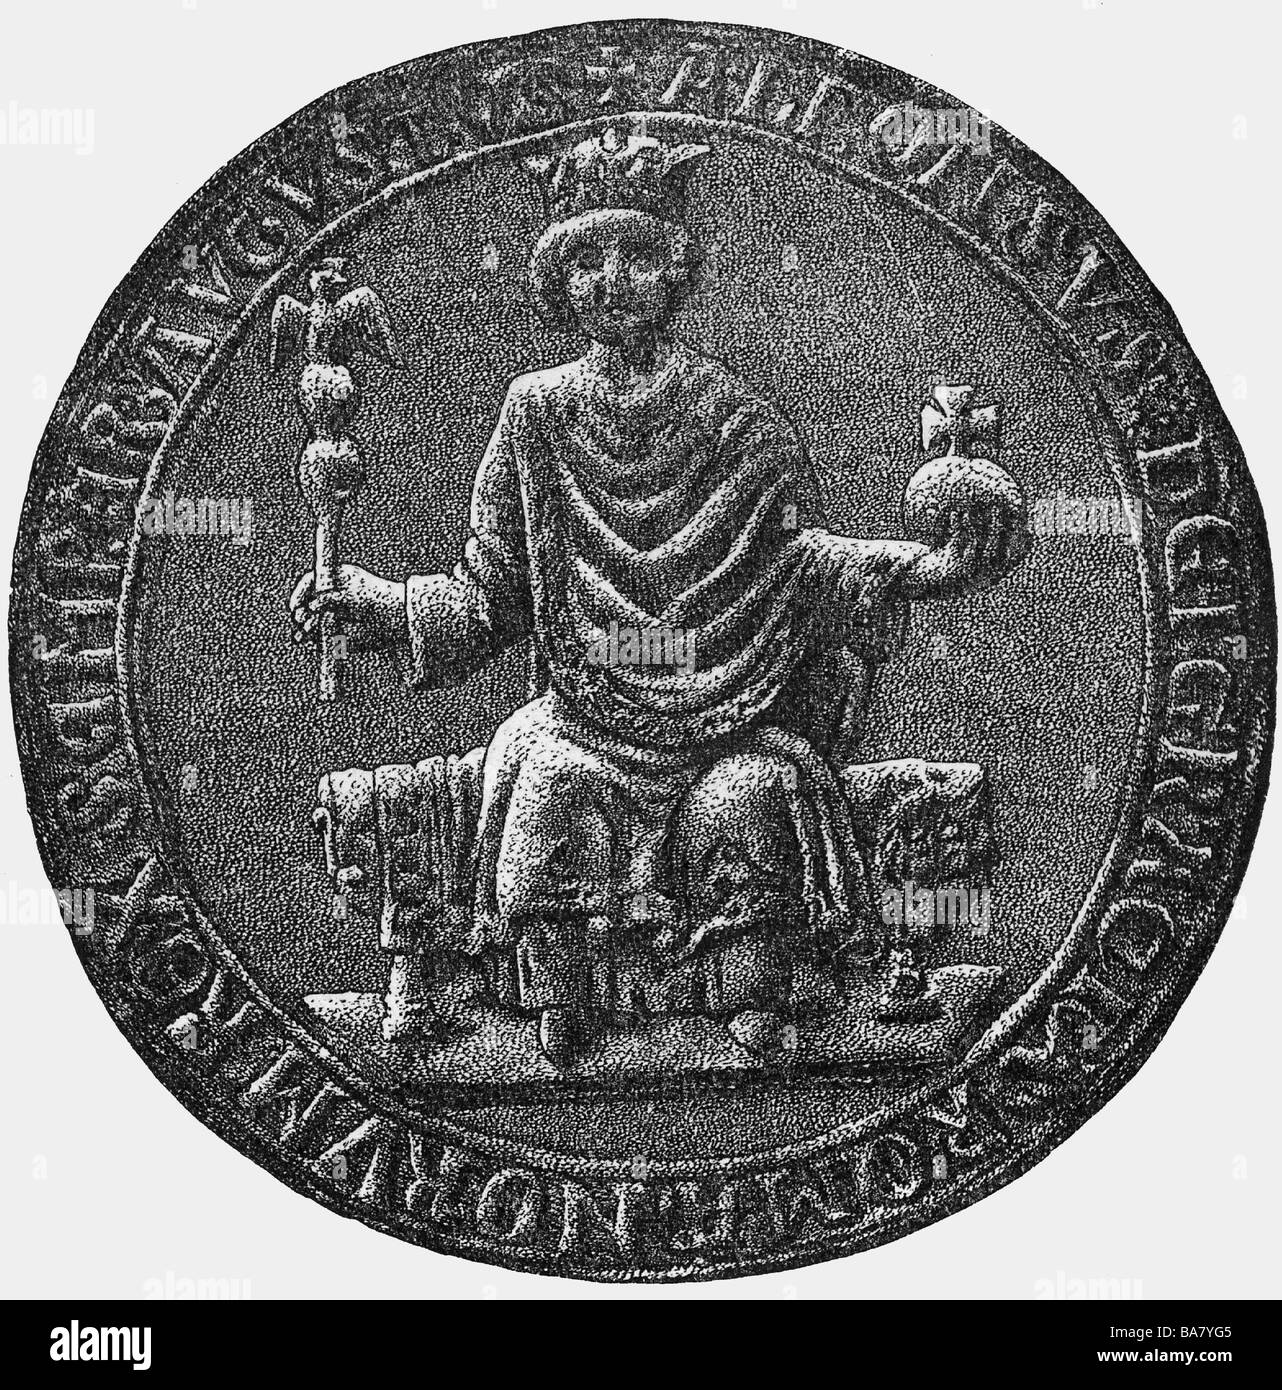 Alfonso X of Castile, 26.11.1221 - 4.4.1284, King of Castile,  Leon and Galicia from 1252, Great Imperial Seal, drawing, 19th century, Stock Photo